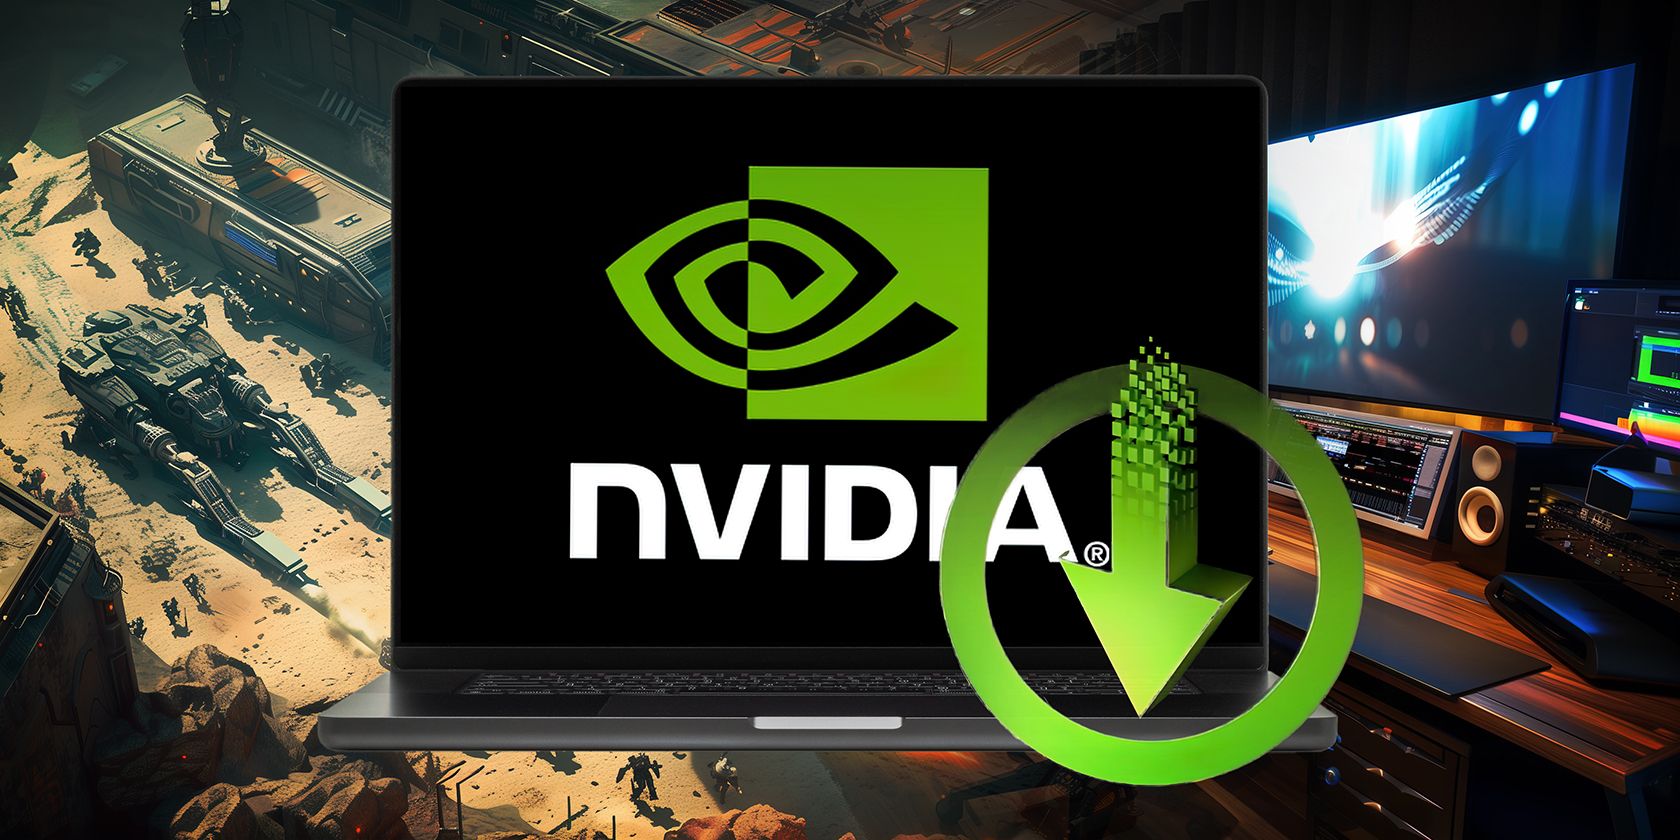 A laptop screen displays the NVIDIA logo with a download icon, set against a gaming setup backdrop.